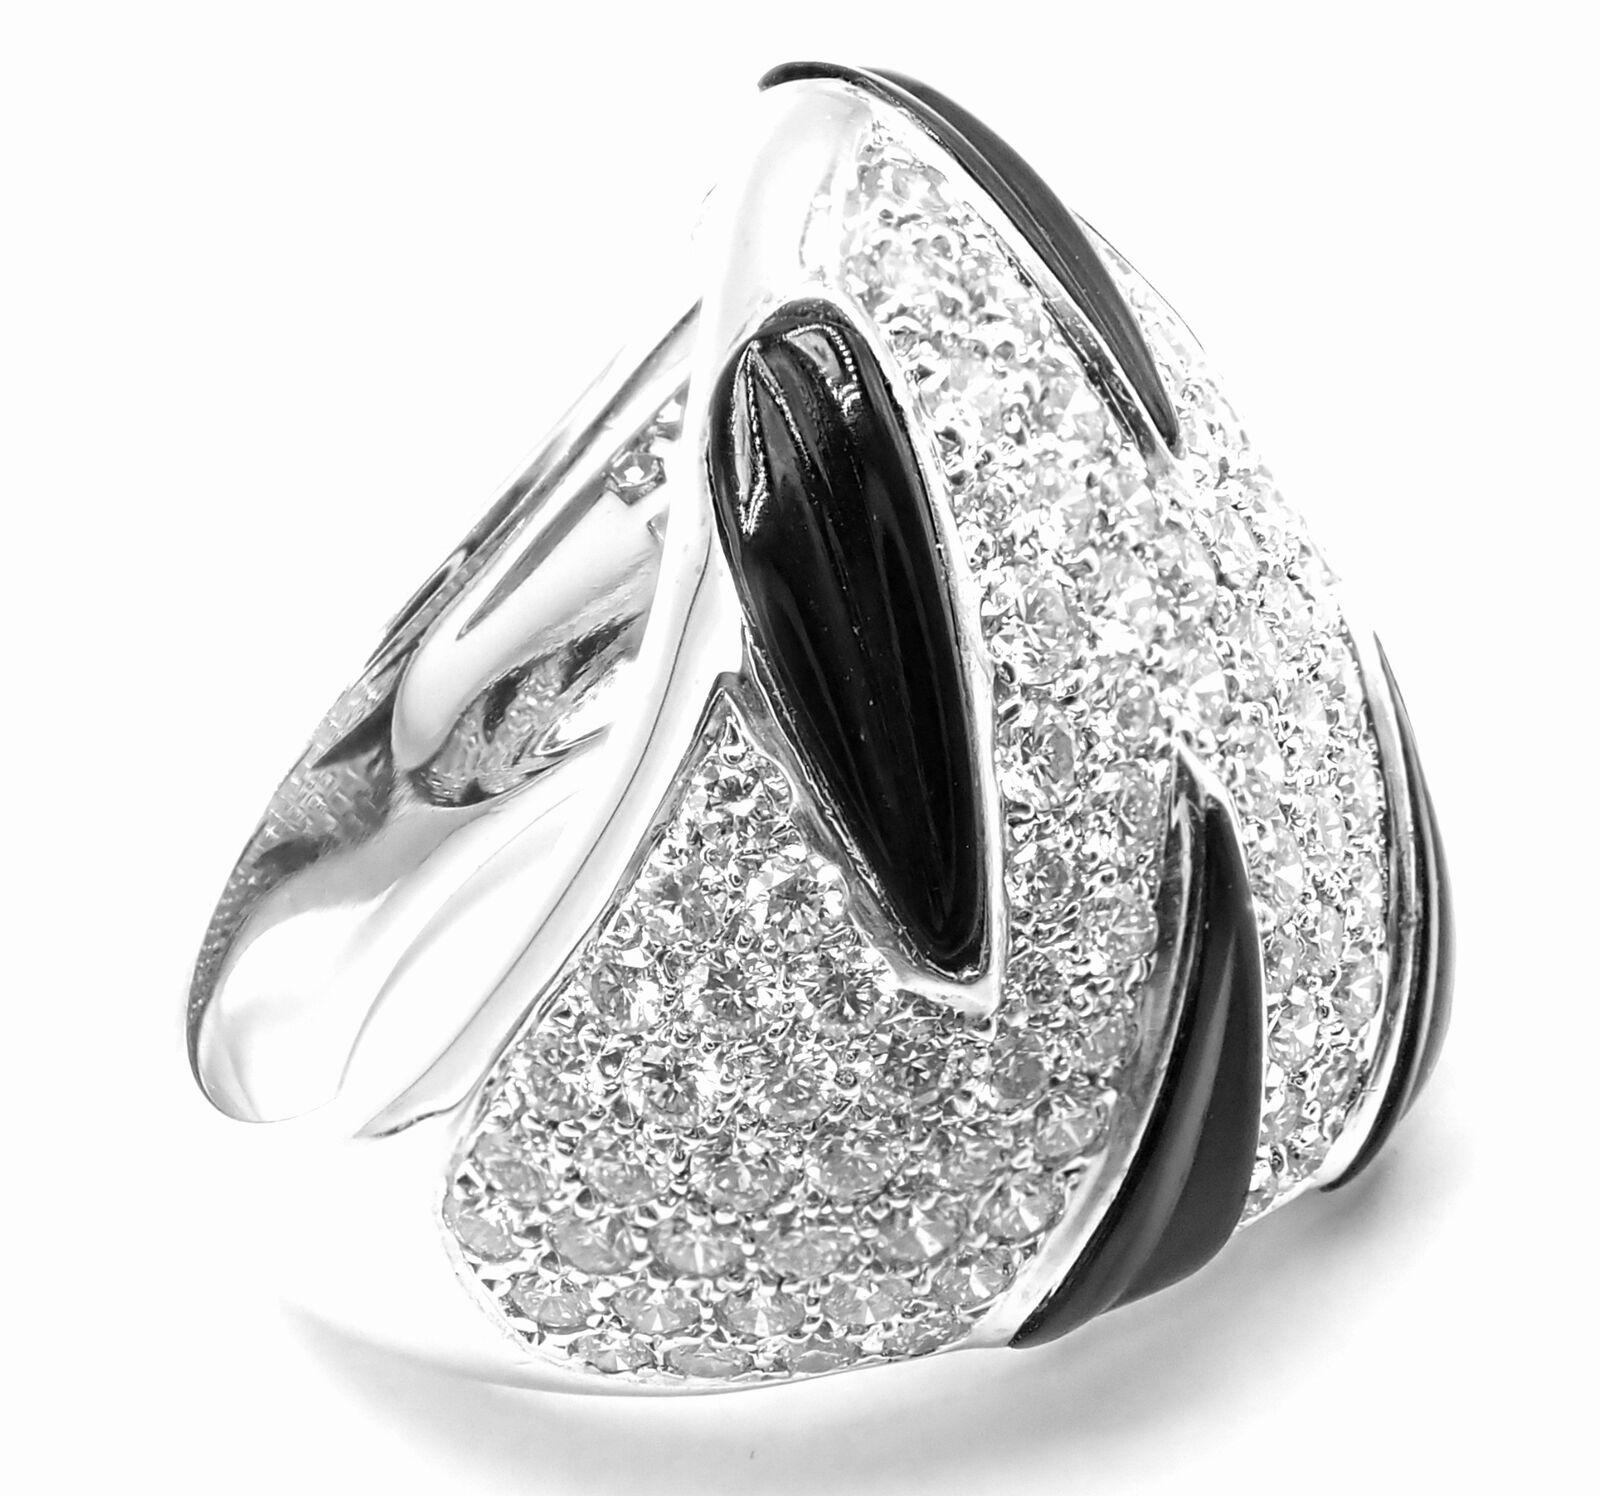 18k White Gold Diamond & Black Onyx Panther Panthere Claw Ring by Cartier.  
This ring comes with Cartier box.
With 145 Round brilliant cut diamonds VVS1 clarity, E color total weight approximately 1.70ct 
6 Black Onyx stones
Details: 
Ring Size: